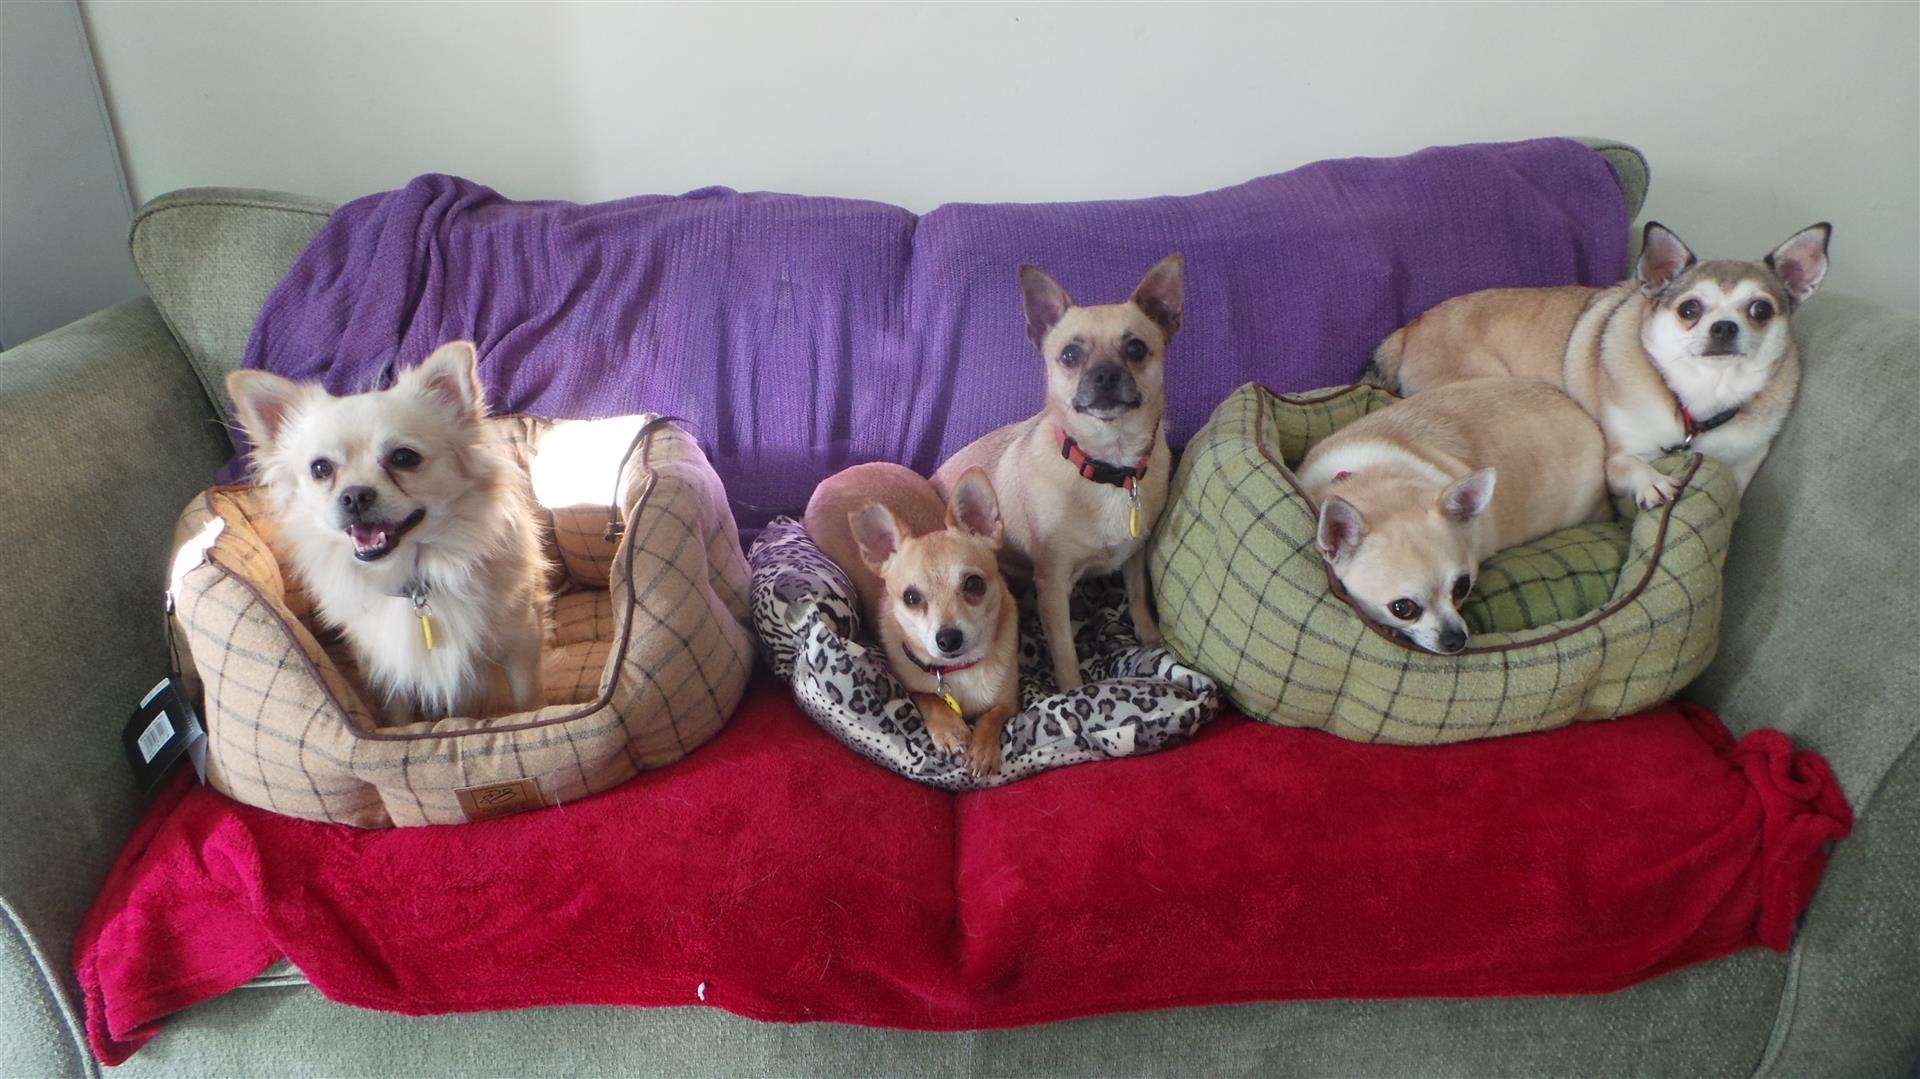 Some of the Chihuahua family